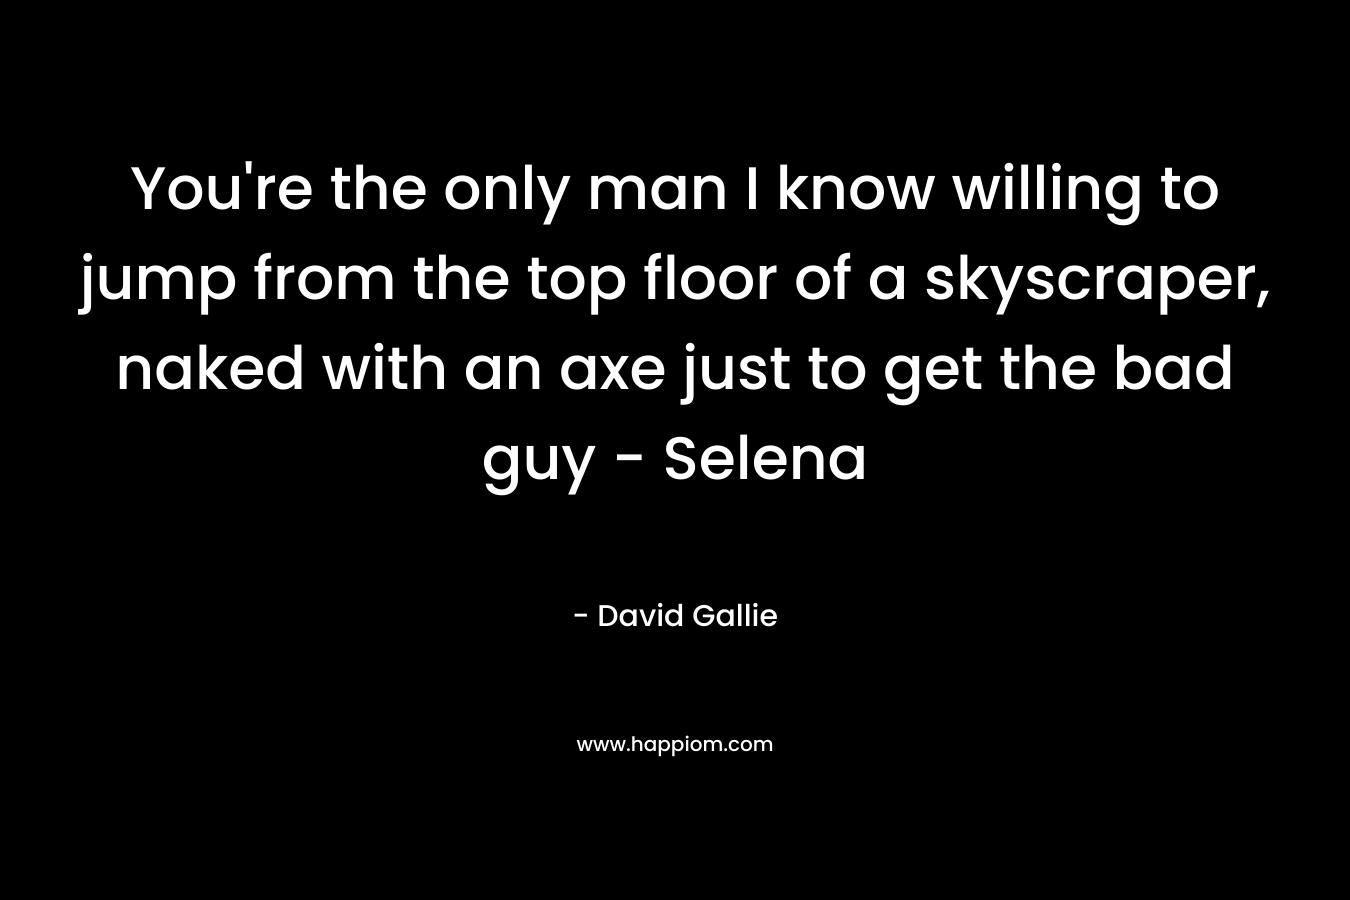 You’re the only man I know willing to jump from the top floor of a skyscraper, naked with an axe just to get the bad guy – Selena – David Gallie